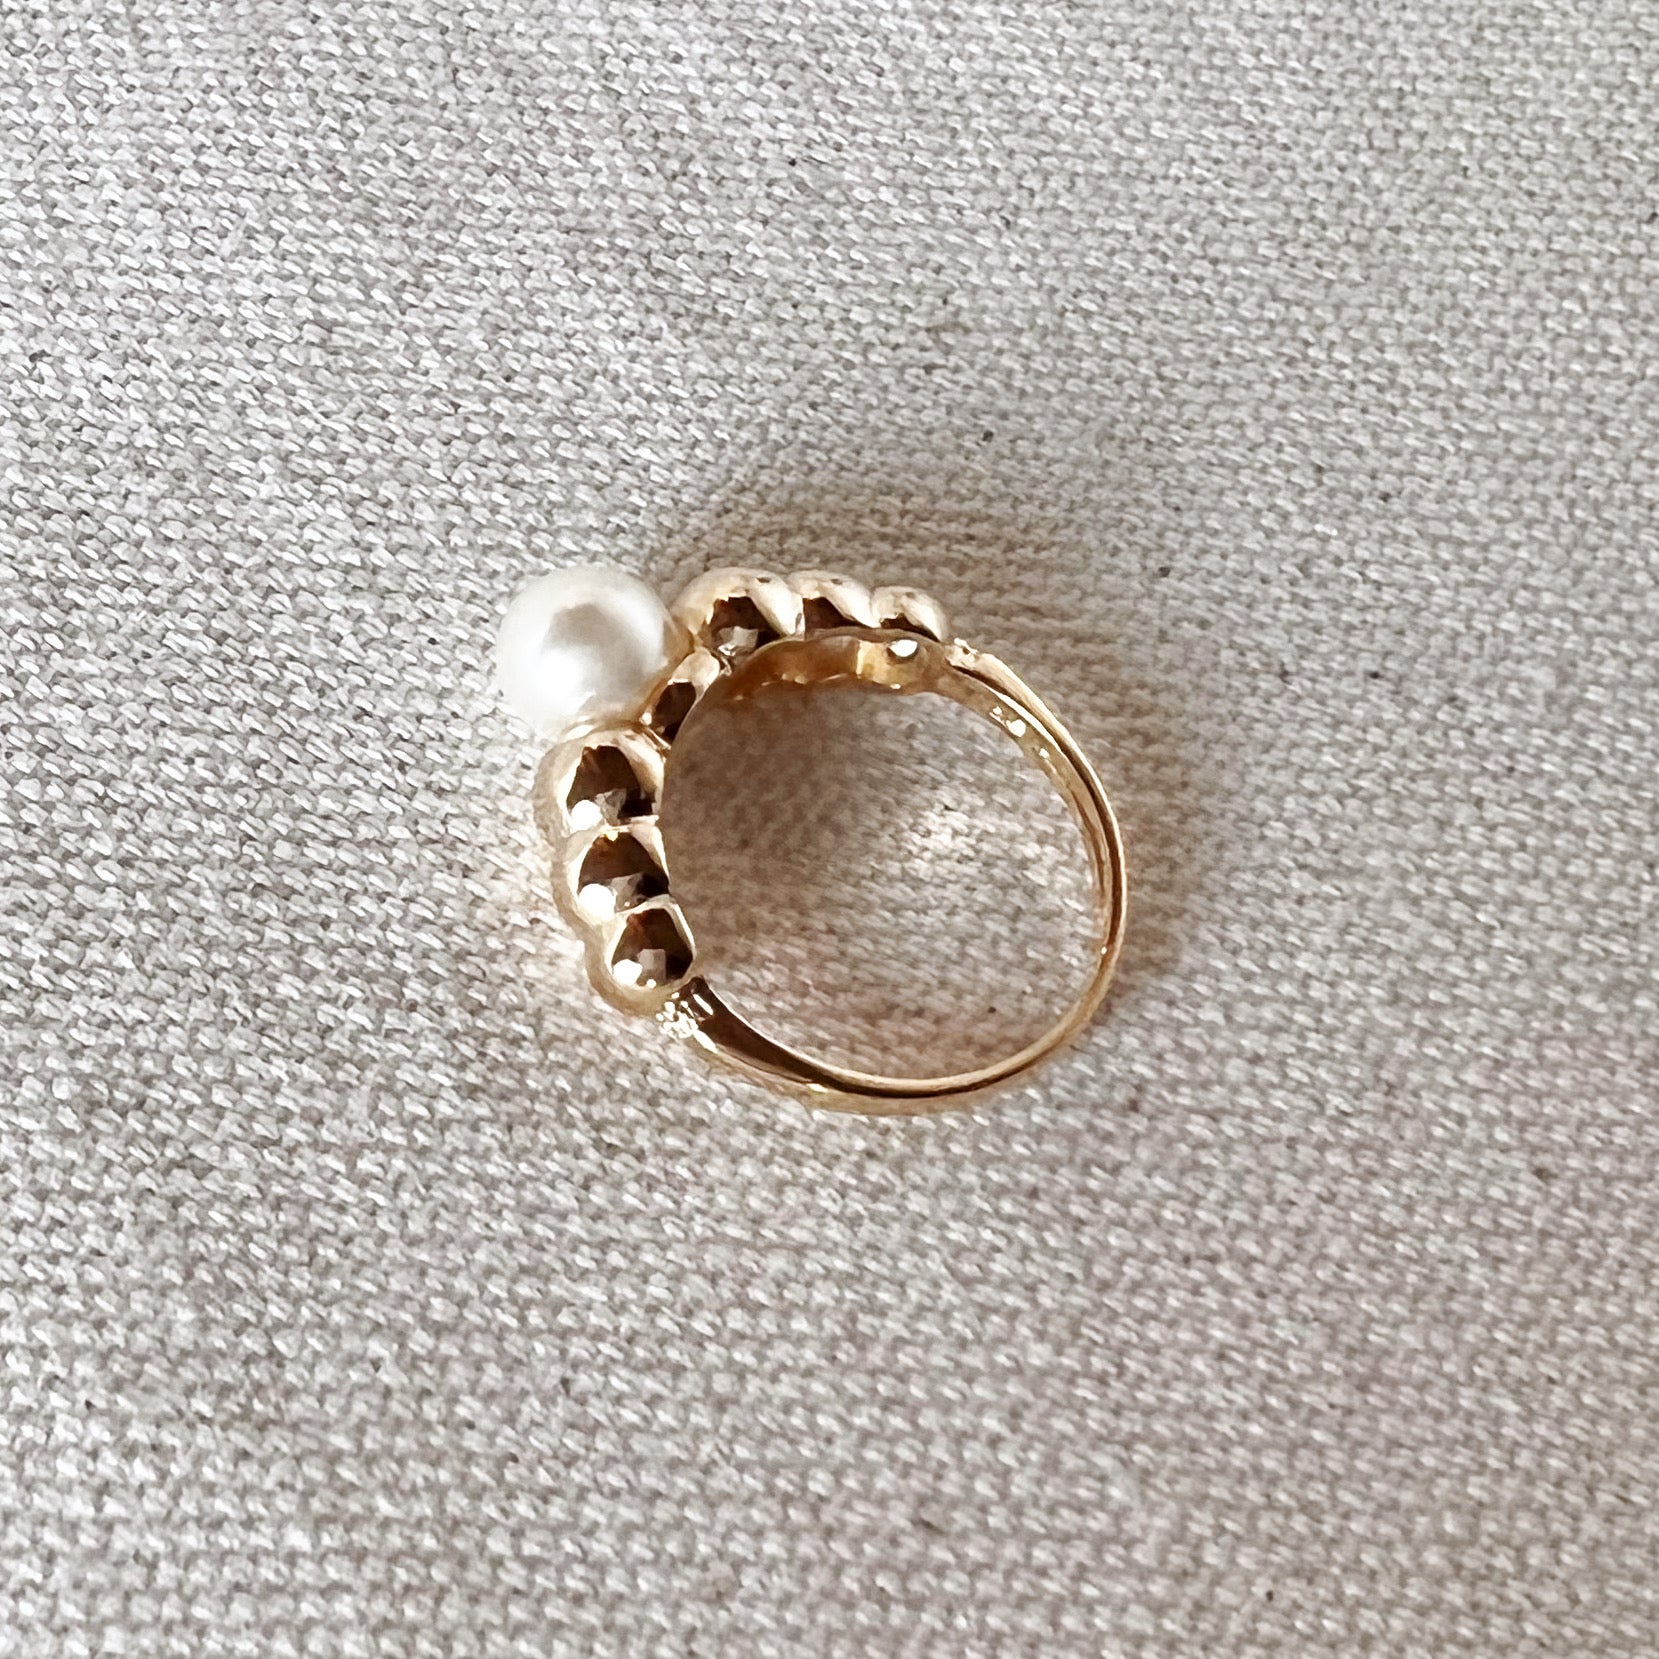 GoldFi 18k Gold Filled Beads and Pearl Ring